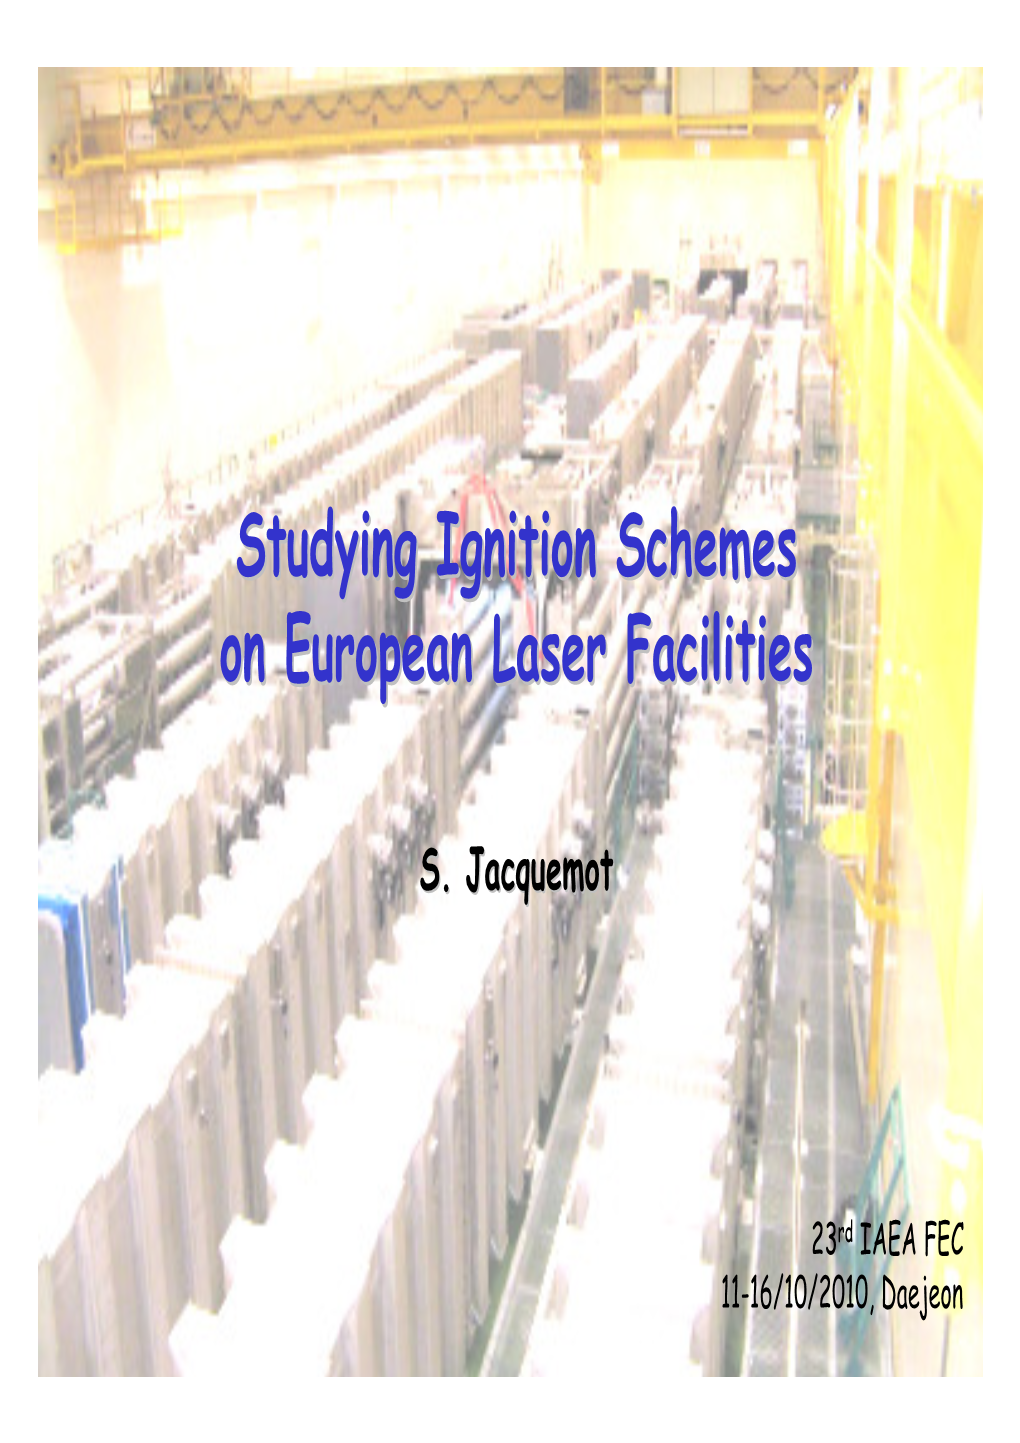 Studying Ignition Schemes on European Laser Facilities